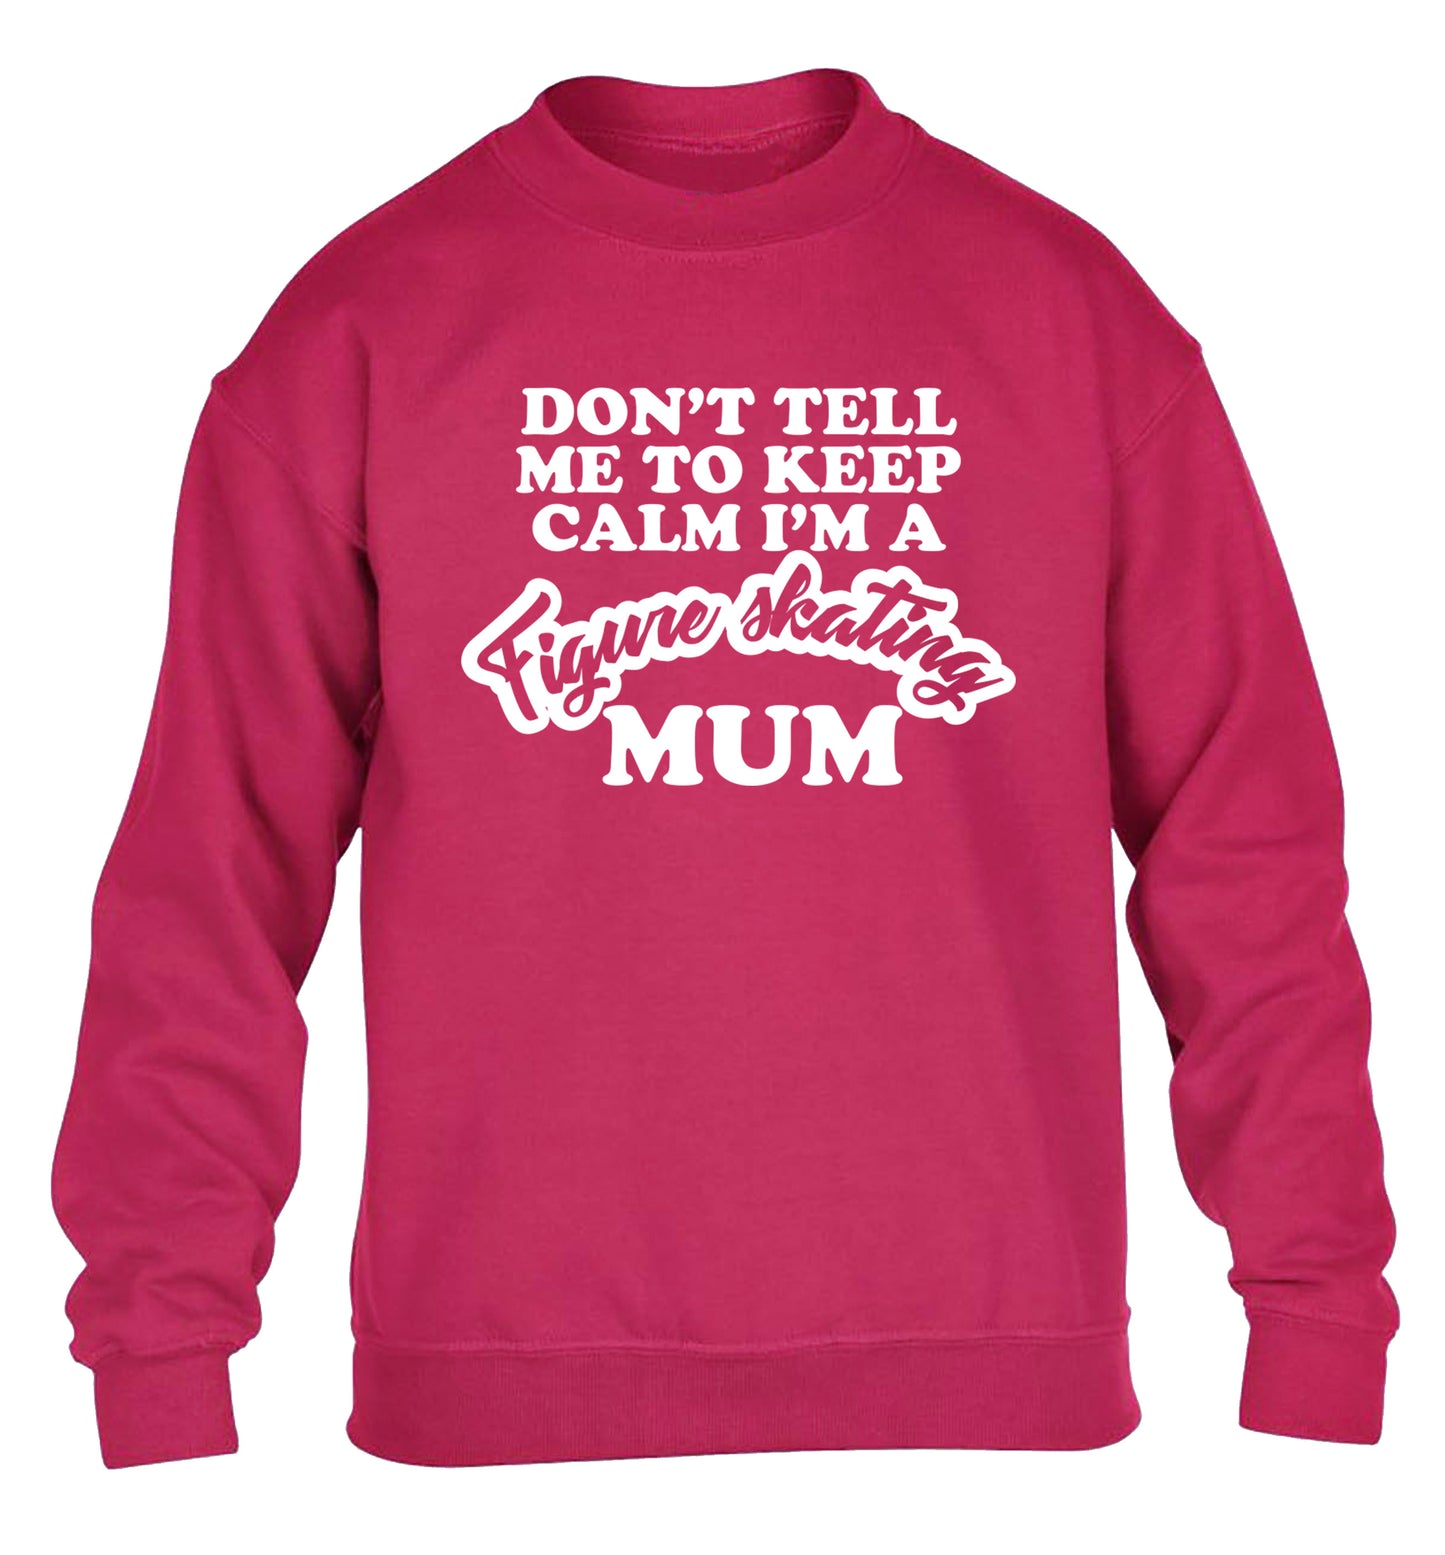 Don't tell me to keep calm I'm a figure skating mum children's pink sweater 12-14 Years